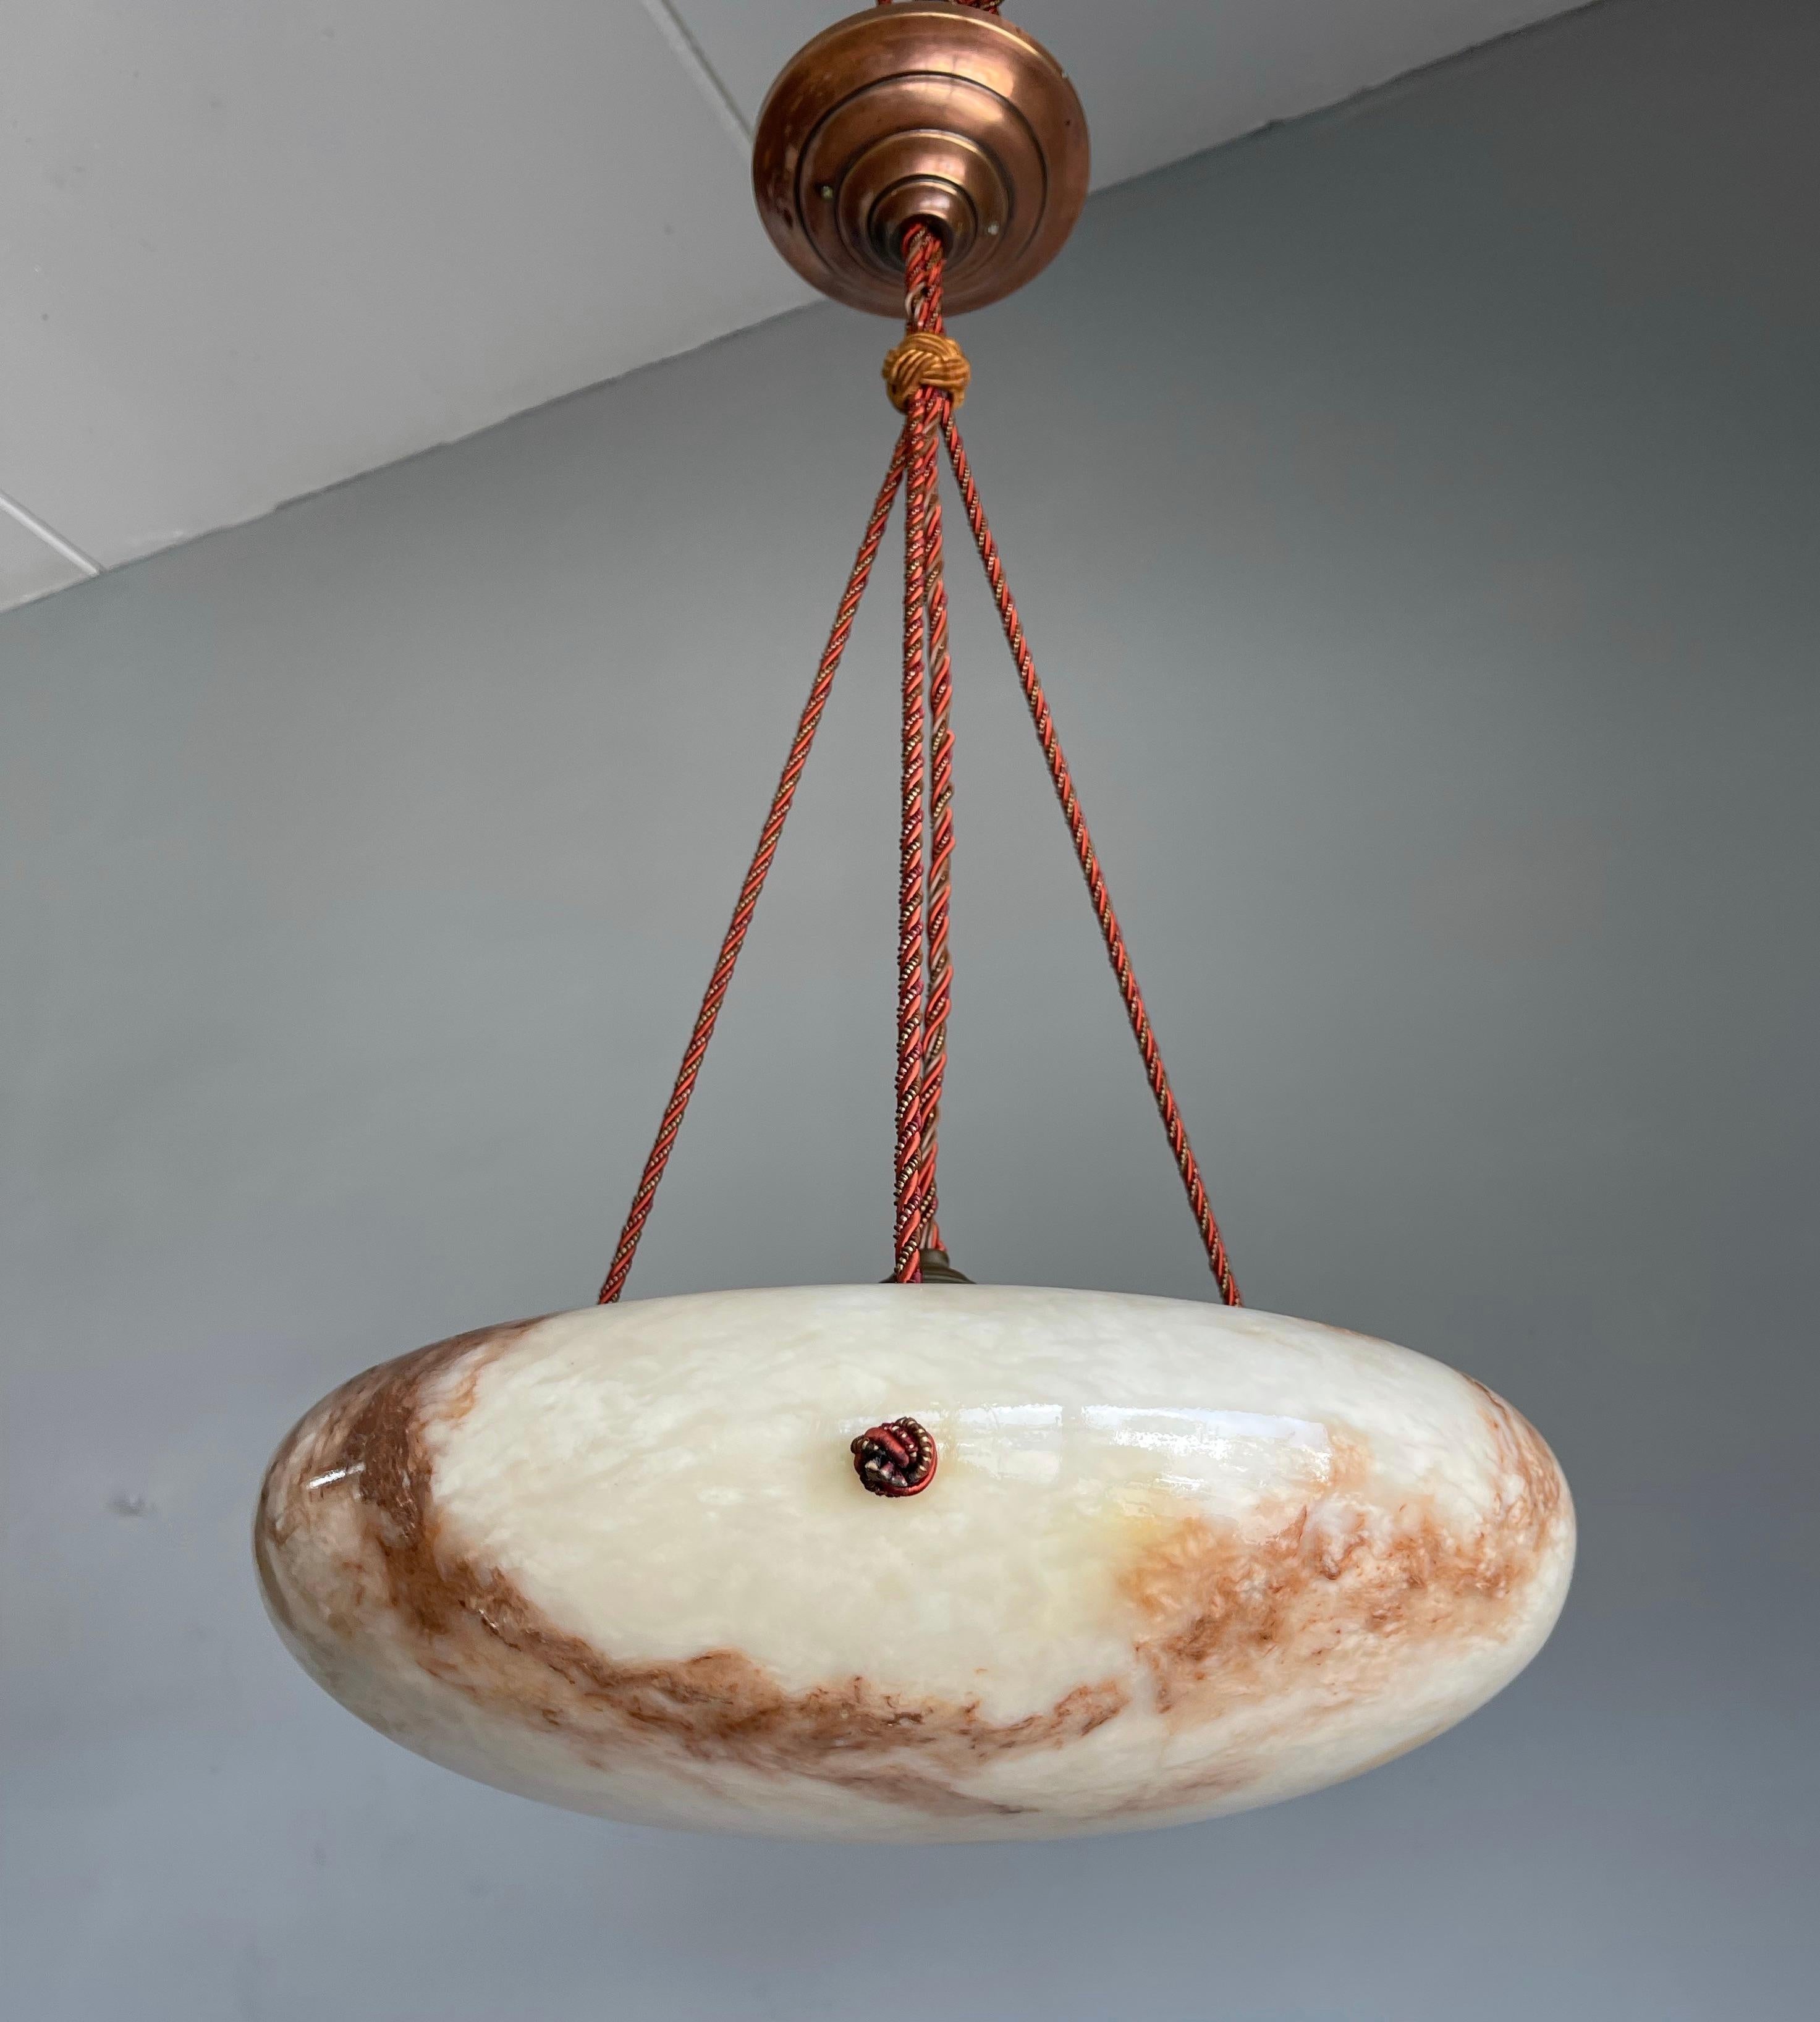 Good size, beautifully rounded design and warm color alabaster pendant.

If you are looking for a good quality antique light fixture to grace your home or office then this beautiful shape and all-handcrafted alabaster chandelier could be perfect